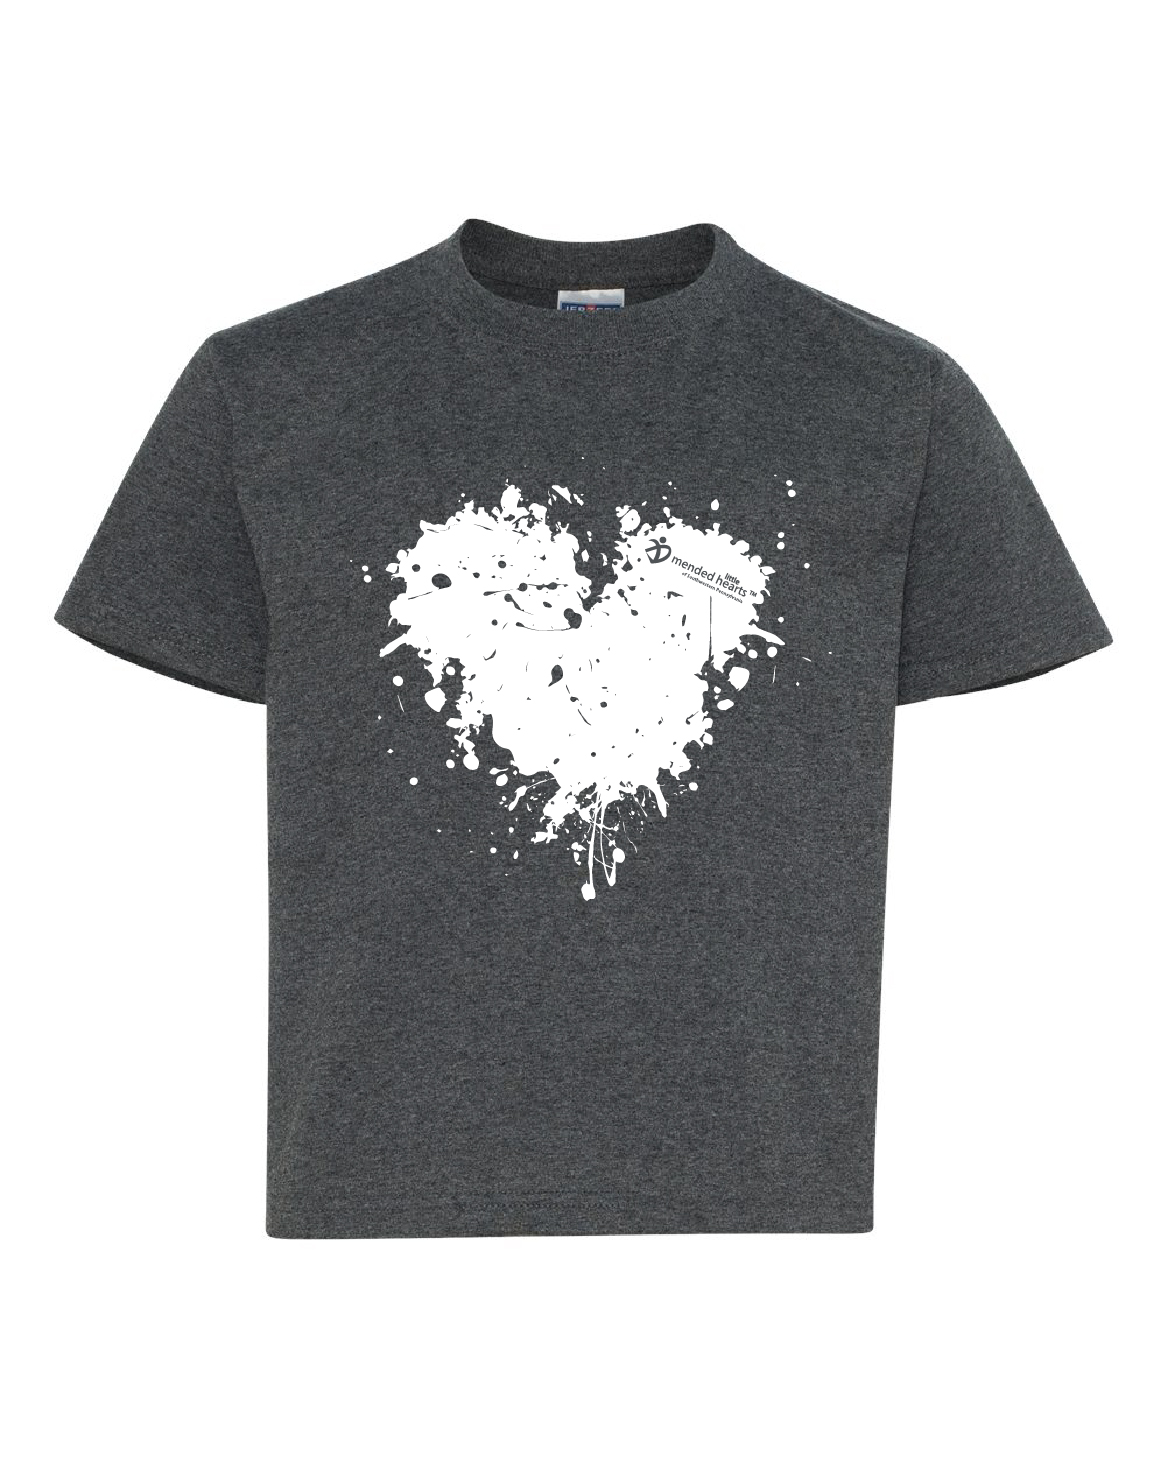 Splatter Heart Youth T-Shirt Available in Multiple Colors